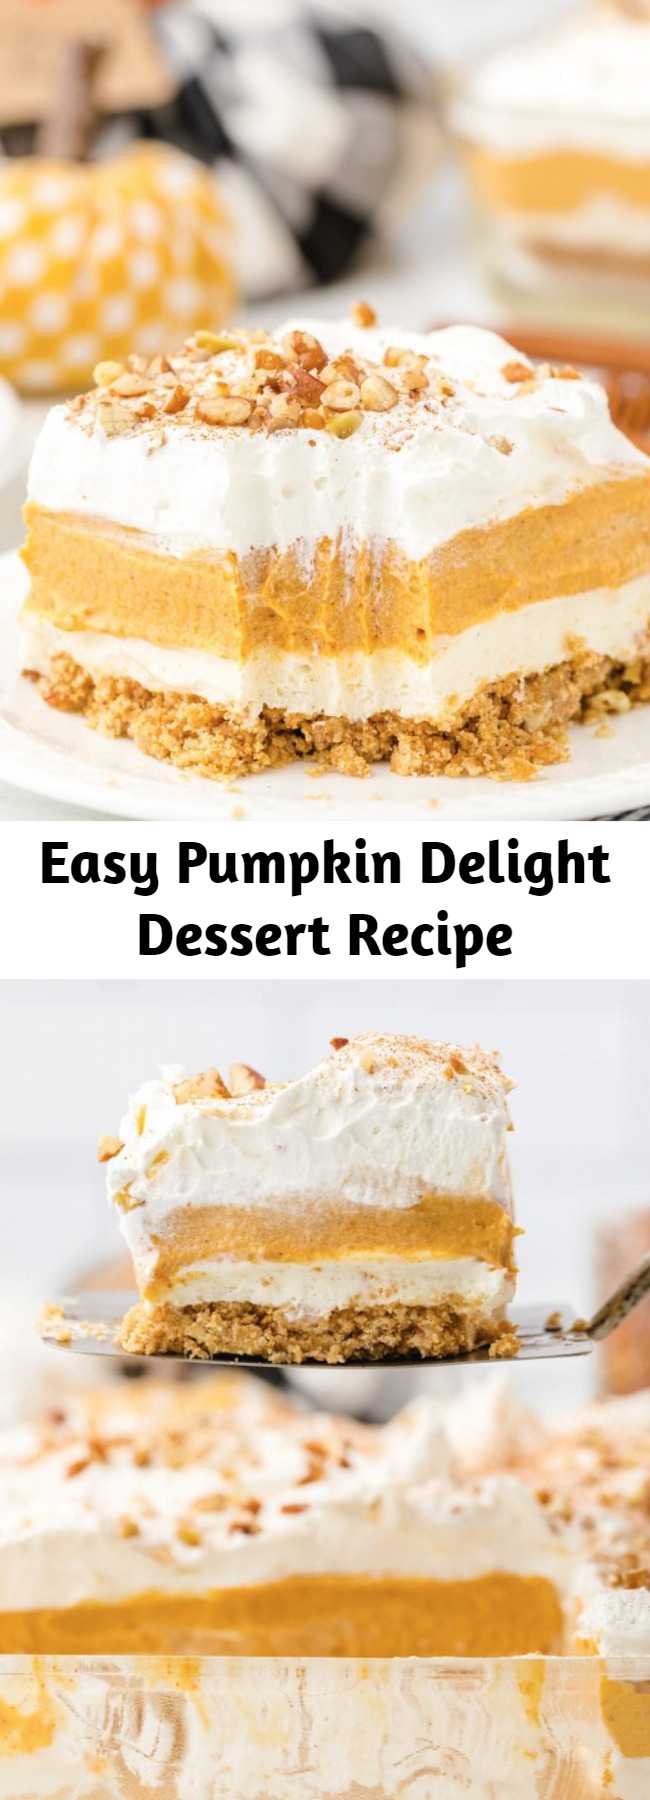 Easy Pumpkin Delight Dessert Recipe - Instead of classic pumpkin pie this fall (or Thanksgiving!), try this easy pumpkin delight instead! A homemade pecan and graham cracker mix forms a crust that is topped with layers of light and fluffy filling including cream cheese, pudding, and Cool Whip make an irresistible treat.